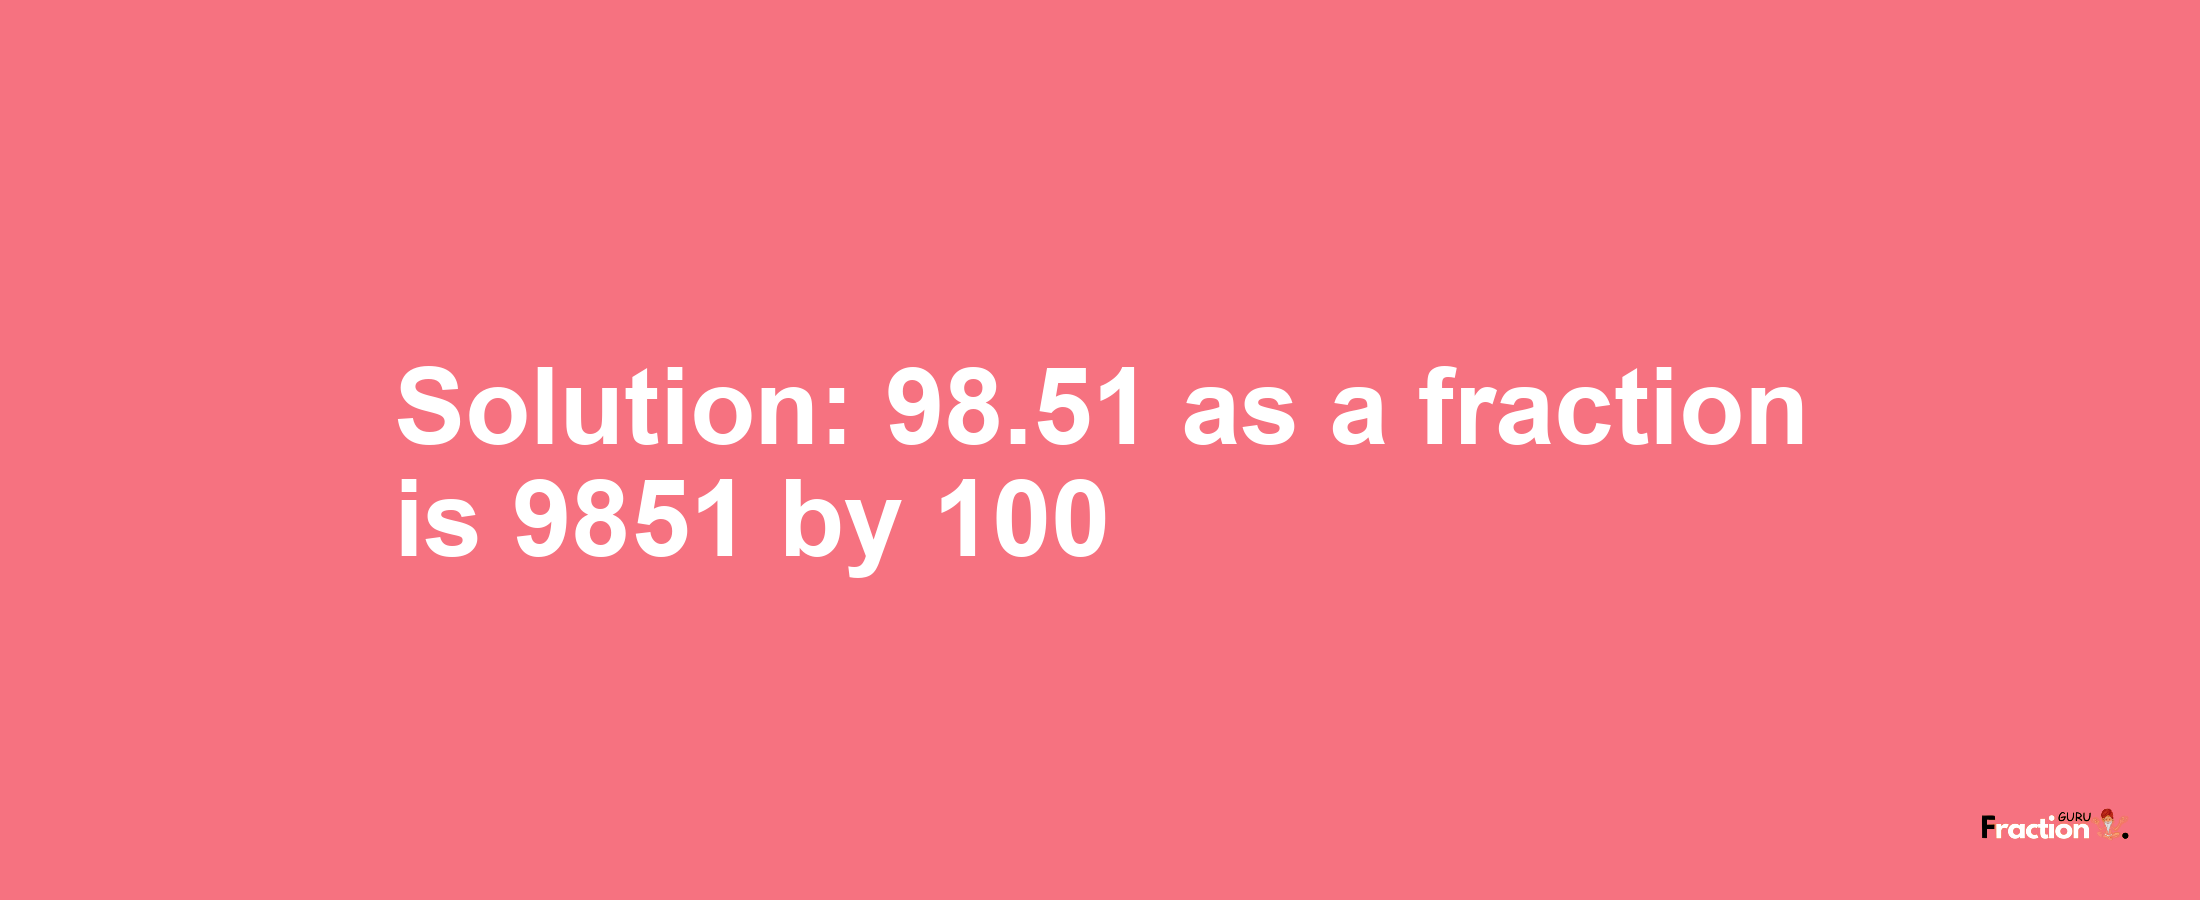 Solution:98.51 as a fraction is 9851/100